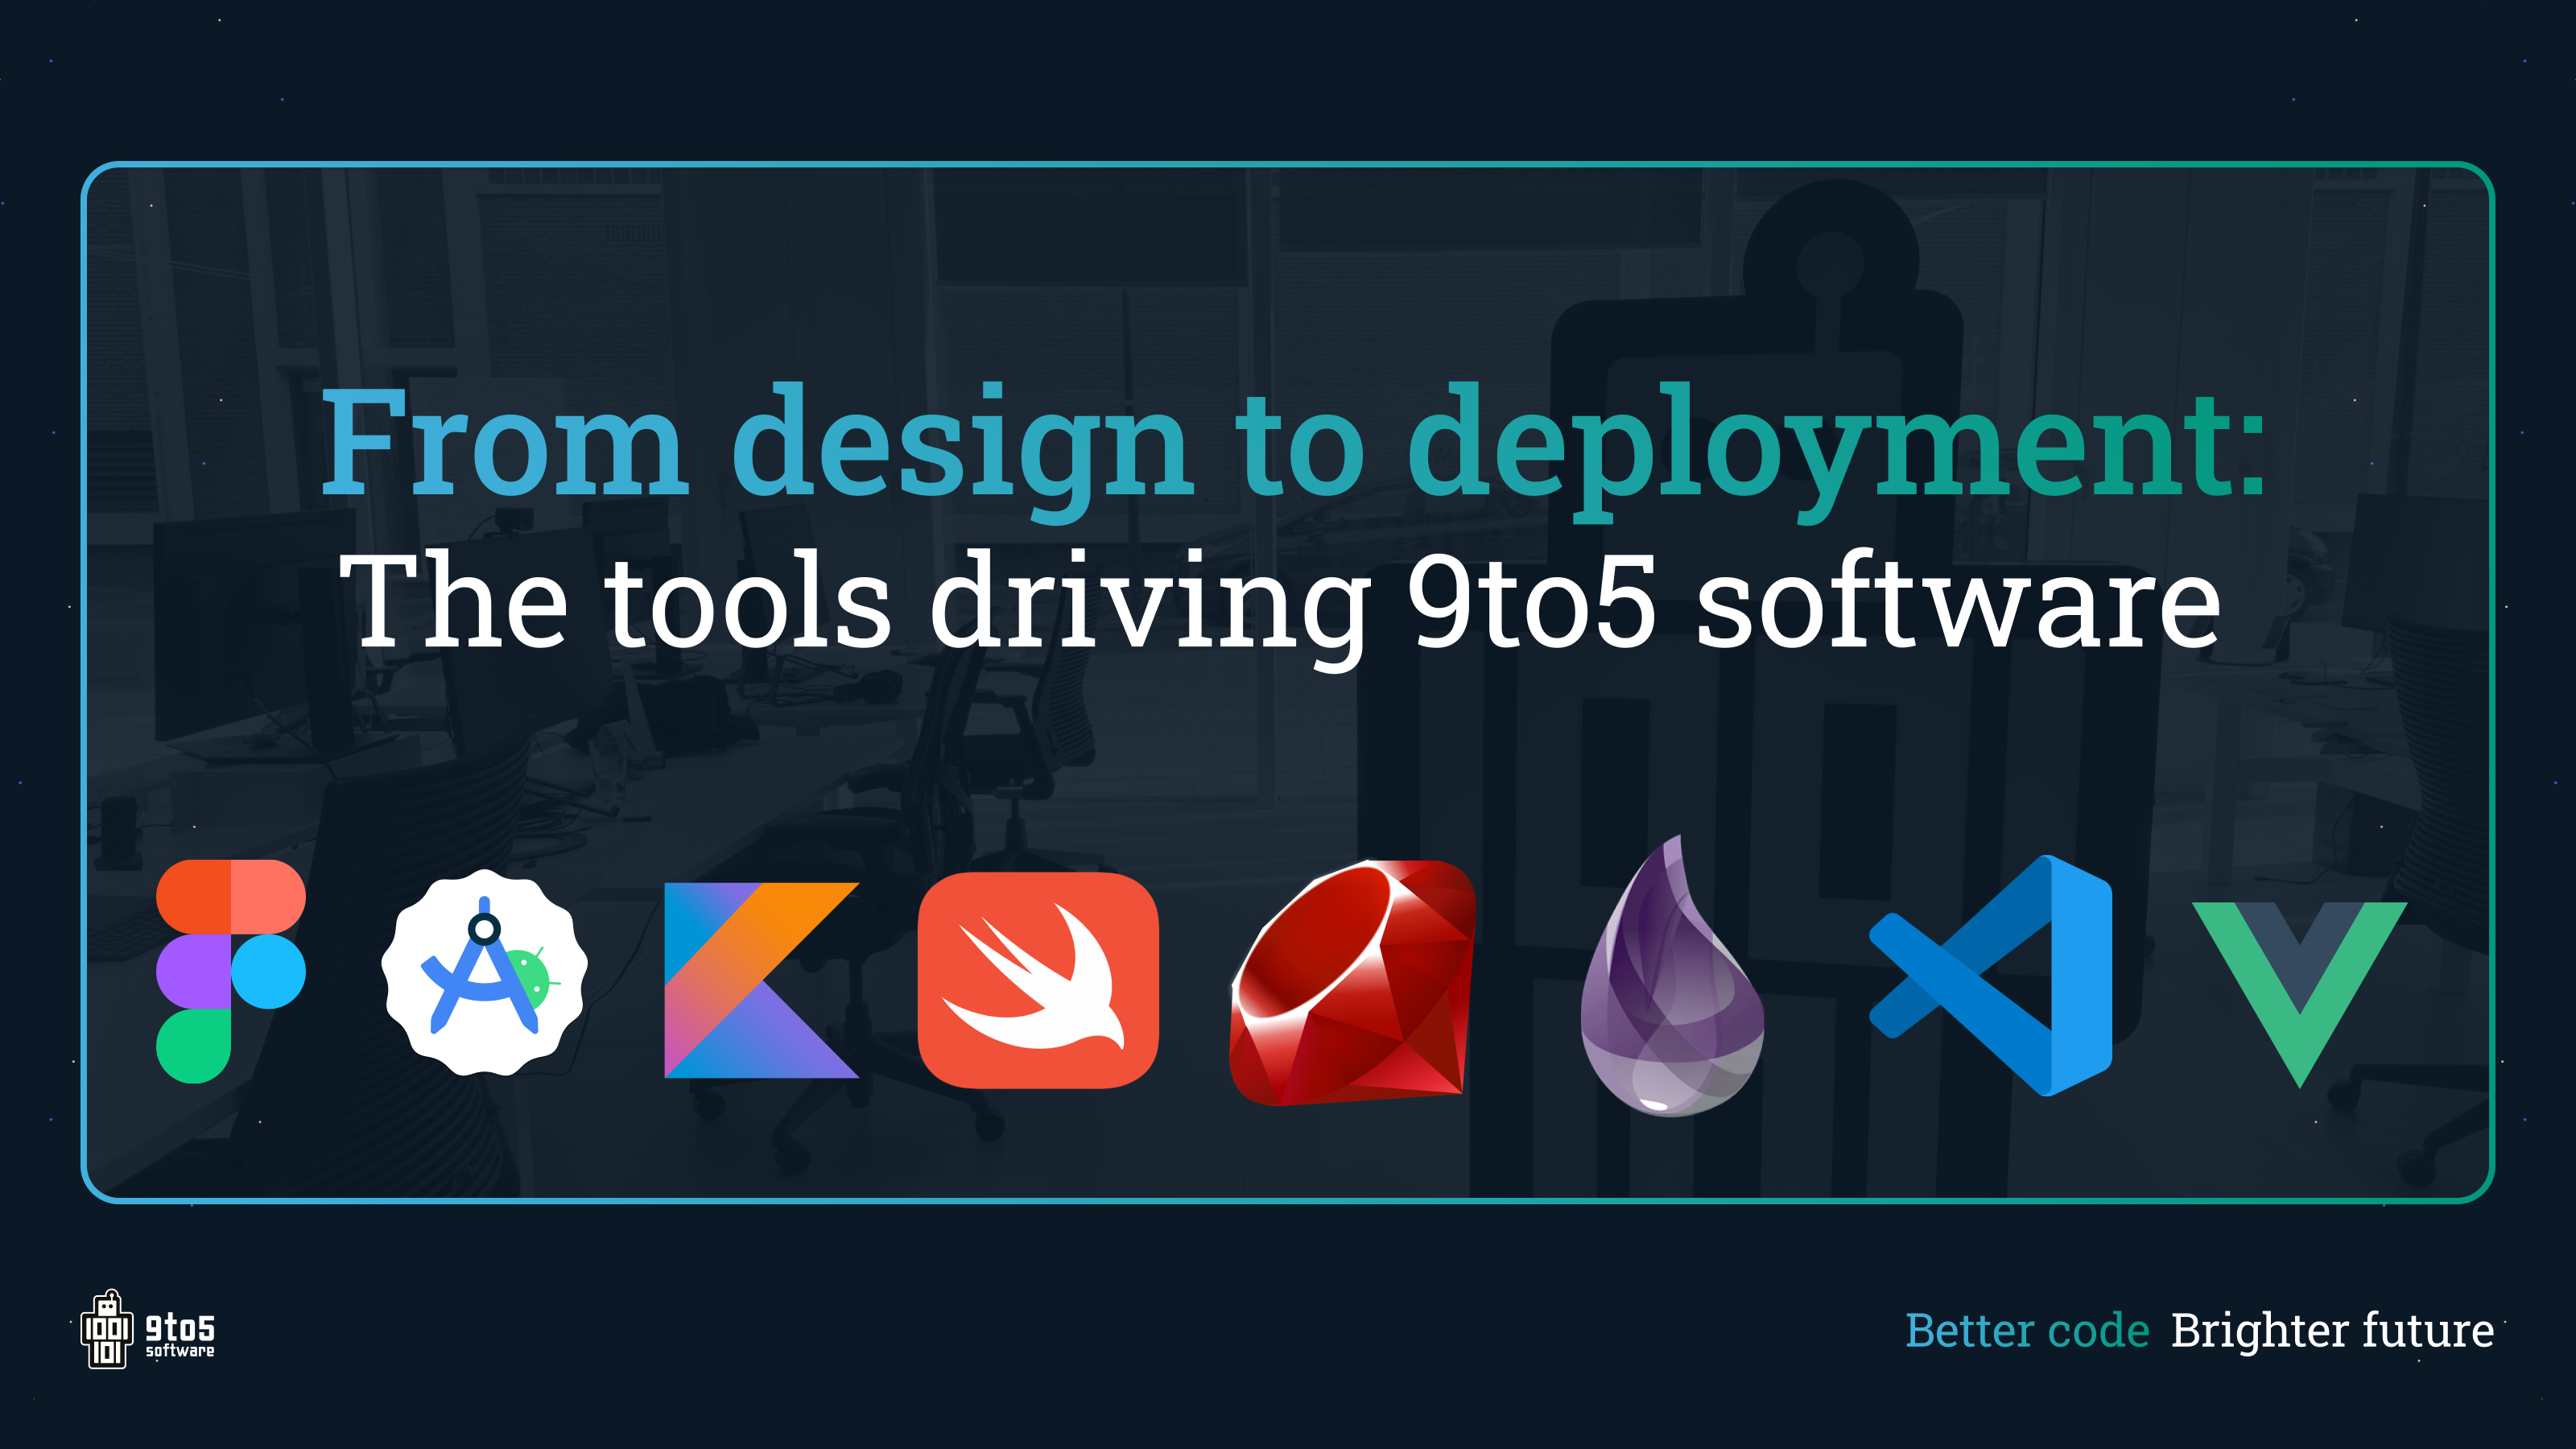 From design to deployment: the tools driving 9to5 software - Discover our teams from design to deployment and the tools that drive our success.